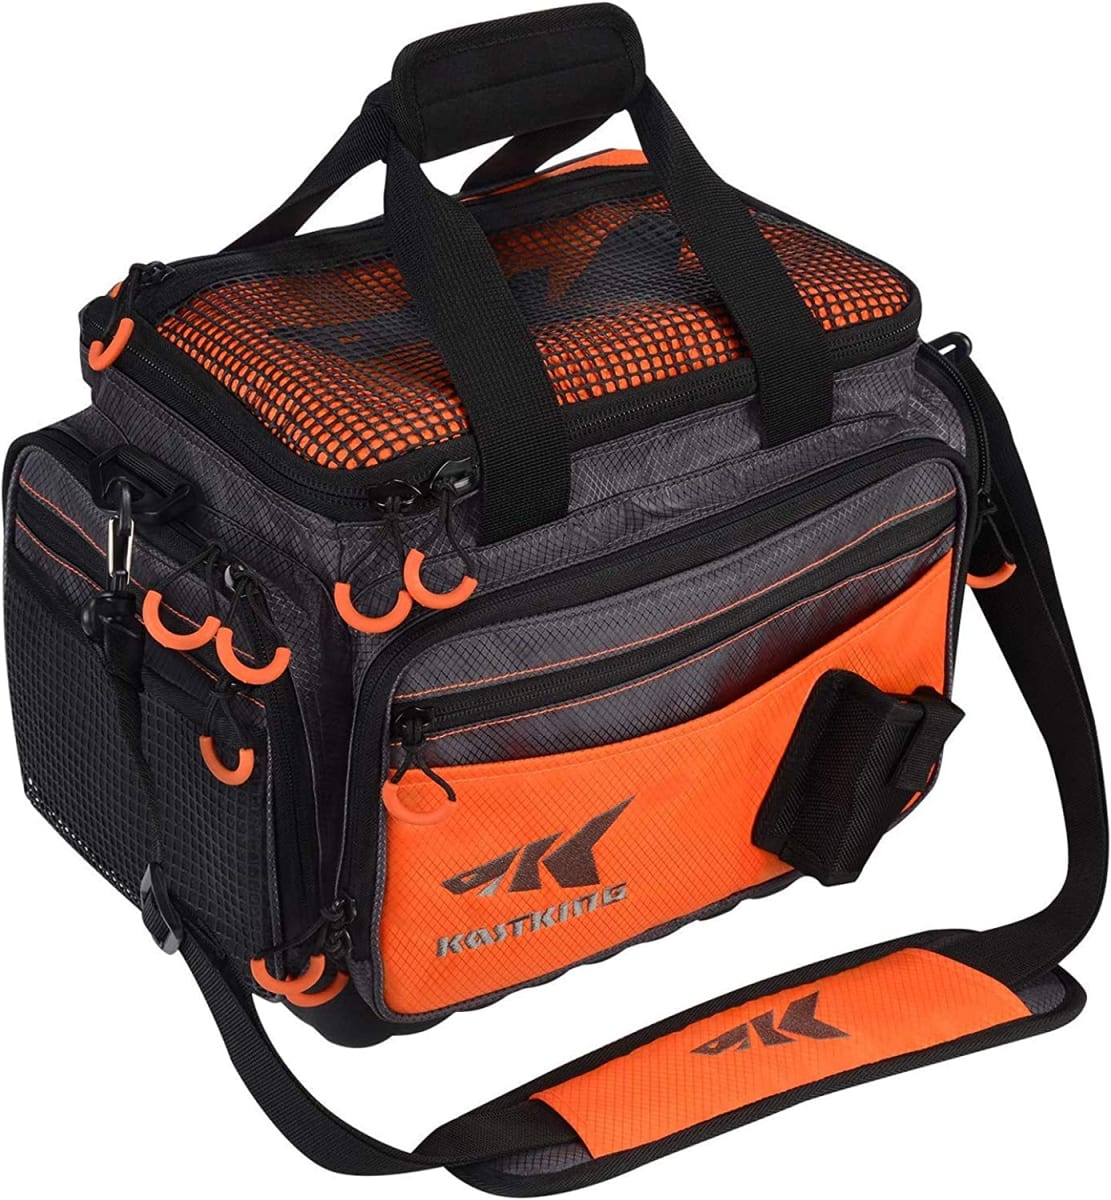 Fishing Tackle Bags - Large Saltwater Resistant Fishing Bags - Fishing Tackle Storage Bags